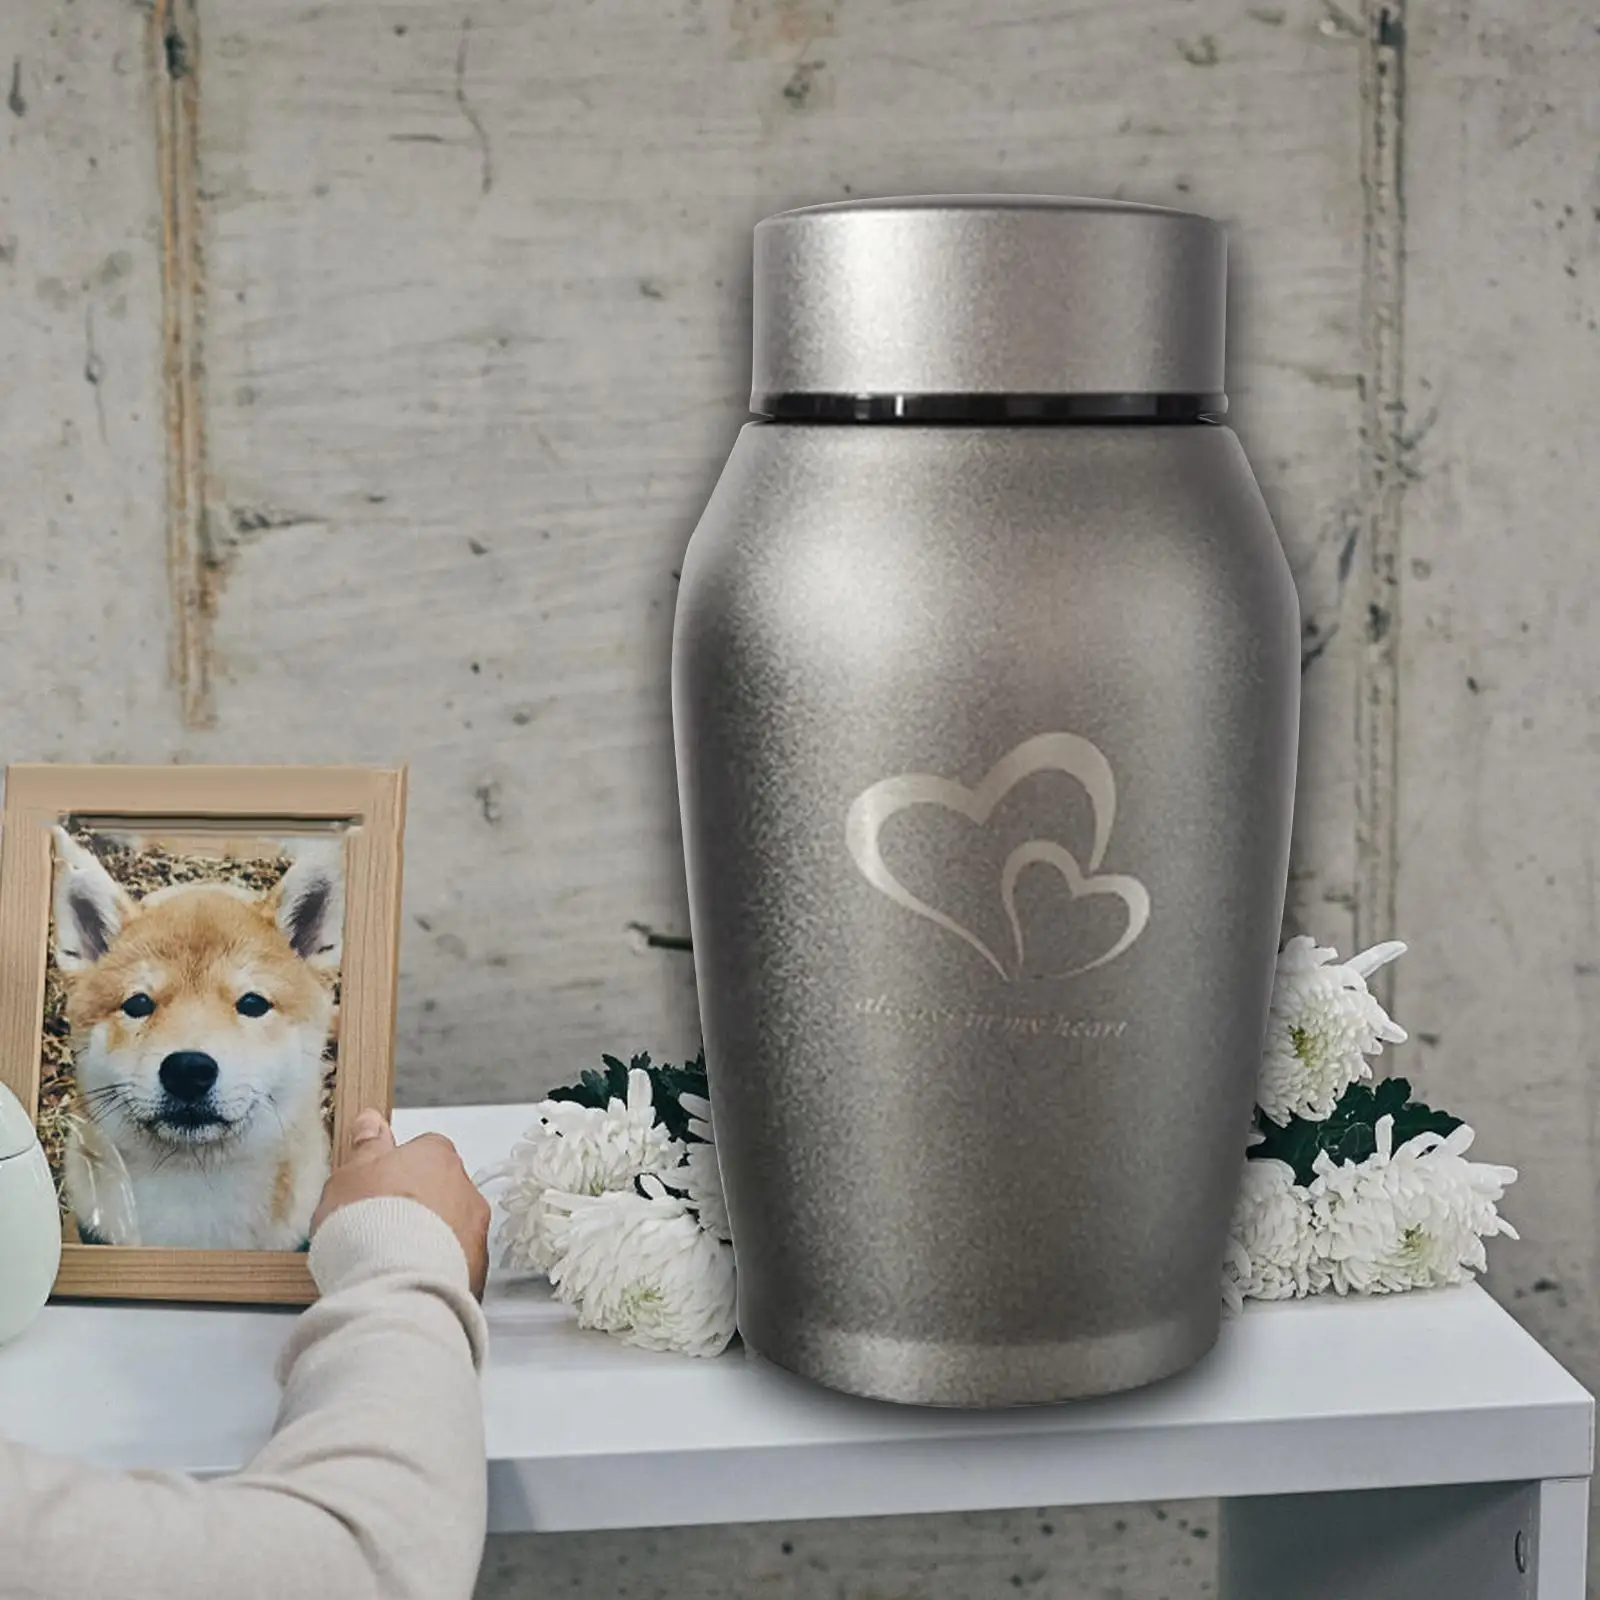 Pet Urns Stainless Steel Cinerary Casket Pet Ash Urn for Dogs Cats Ashes